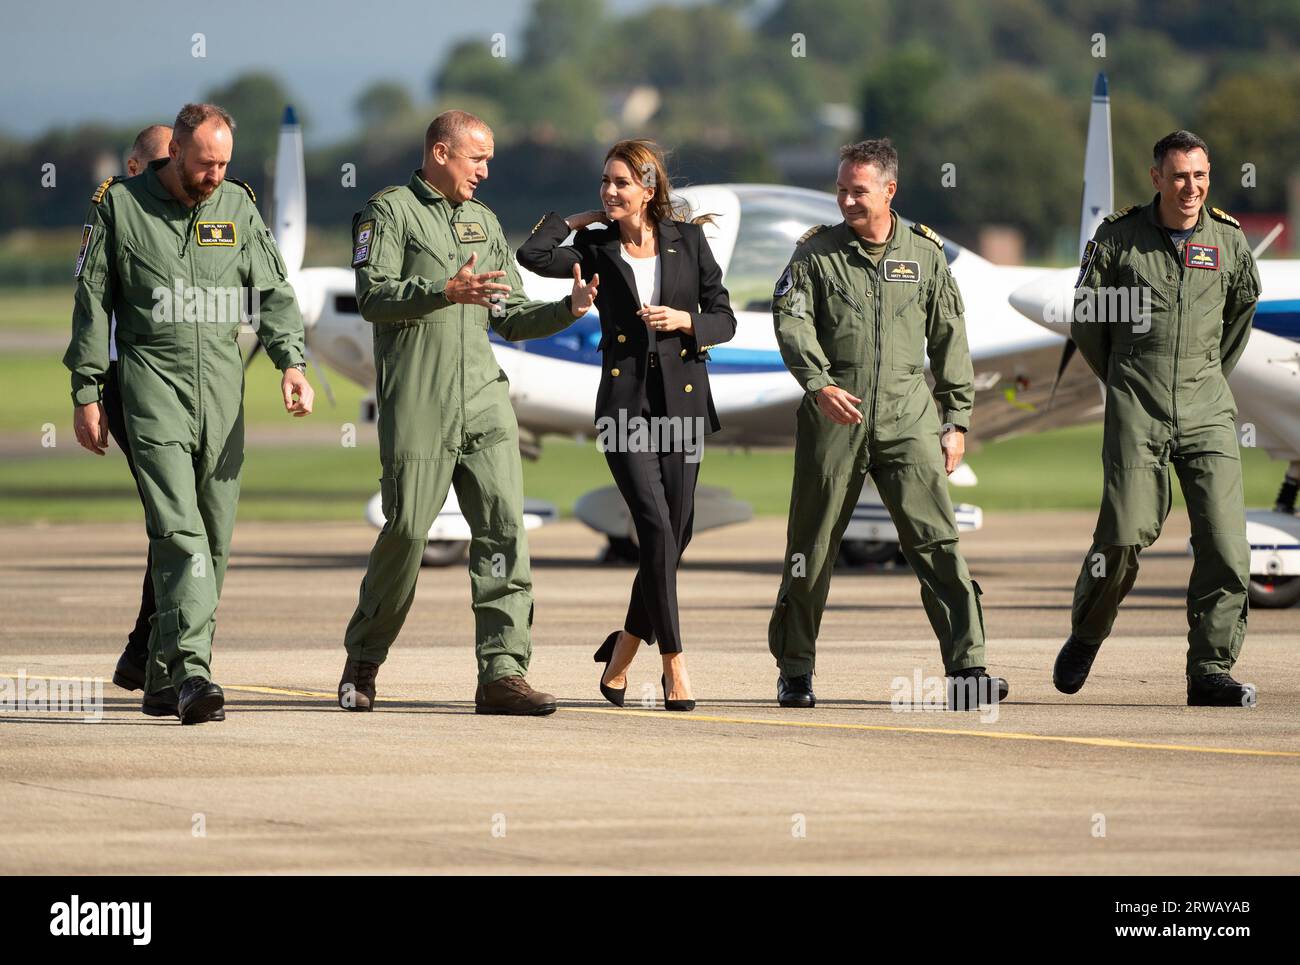 Somerset, UK. September 18th, 2023. The Princess of Wales visits Royal Naval Air Station Yeovilton, one of the Royal Navy's two principal air stations, and one of the busiest military airfields in the UK. The visit follows the recent announcement that His Majesty The King has appointed The Princess, Commodore- in-Chief, Fleet Air Arm. Credit: Doug Peters/EMPICS/Alamy Live News Stock Photo